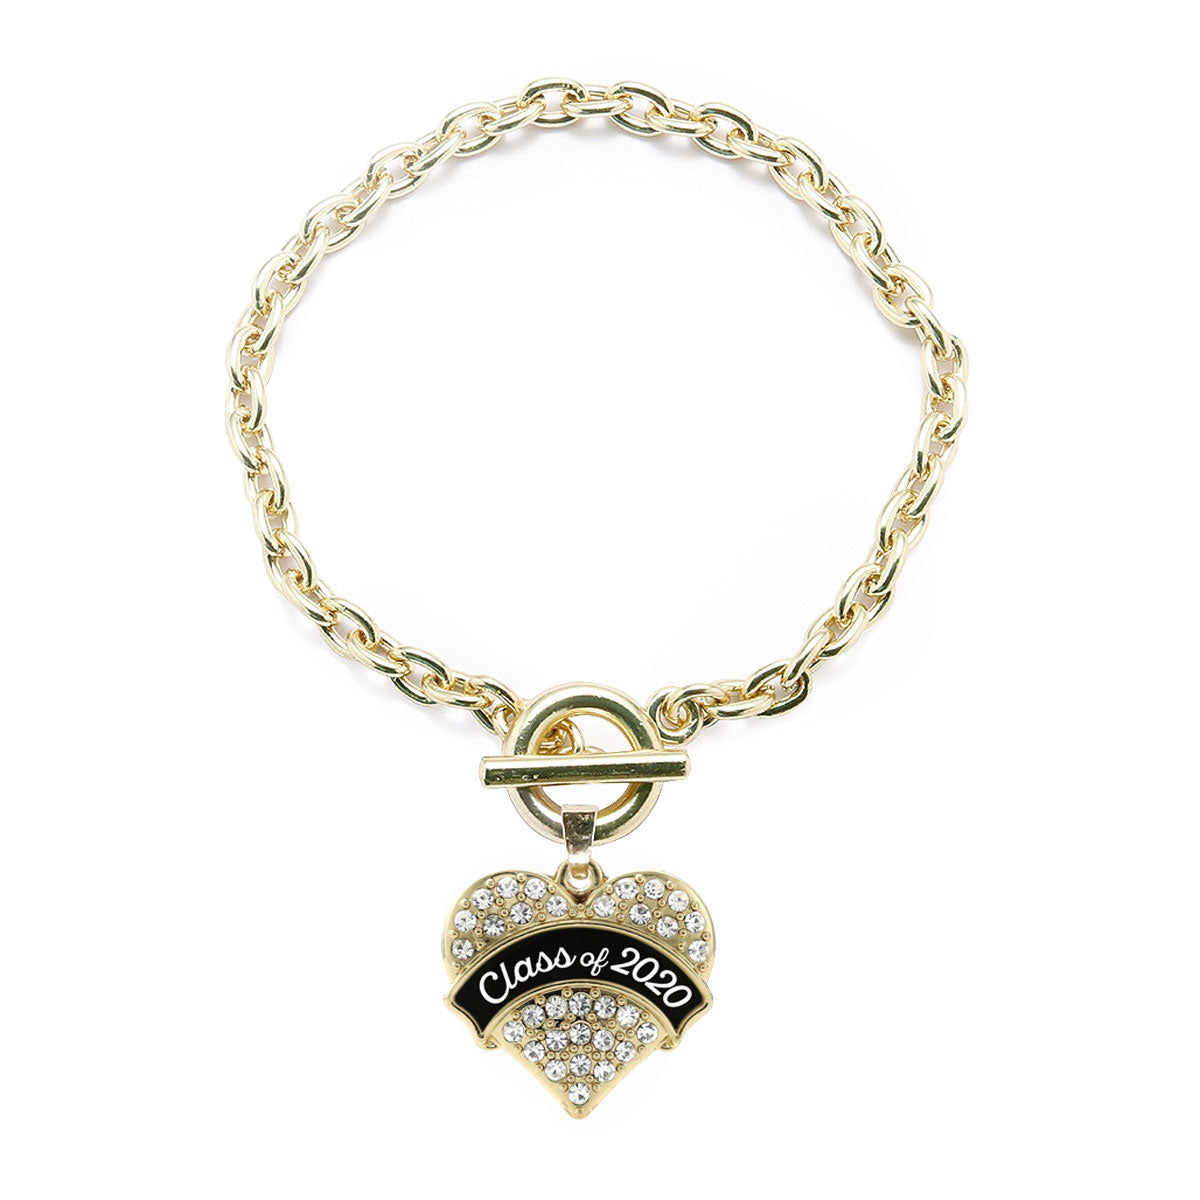 Gold Class of 2020 - Black and White Pave Heart Charm Toggle Bracelet